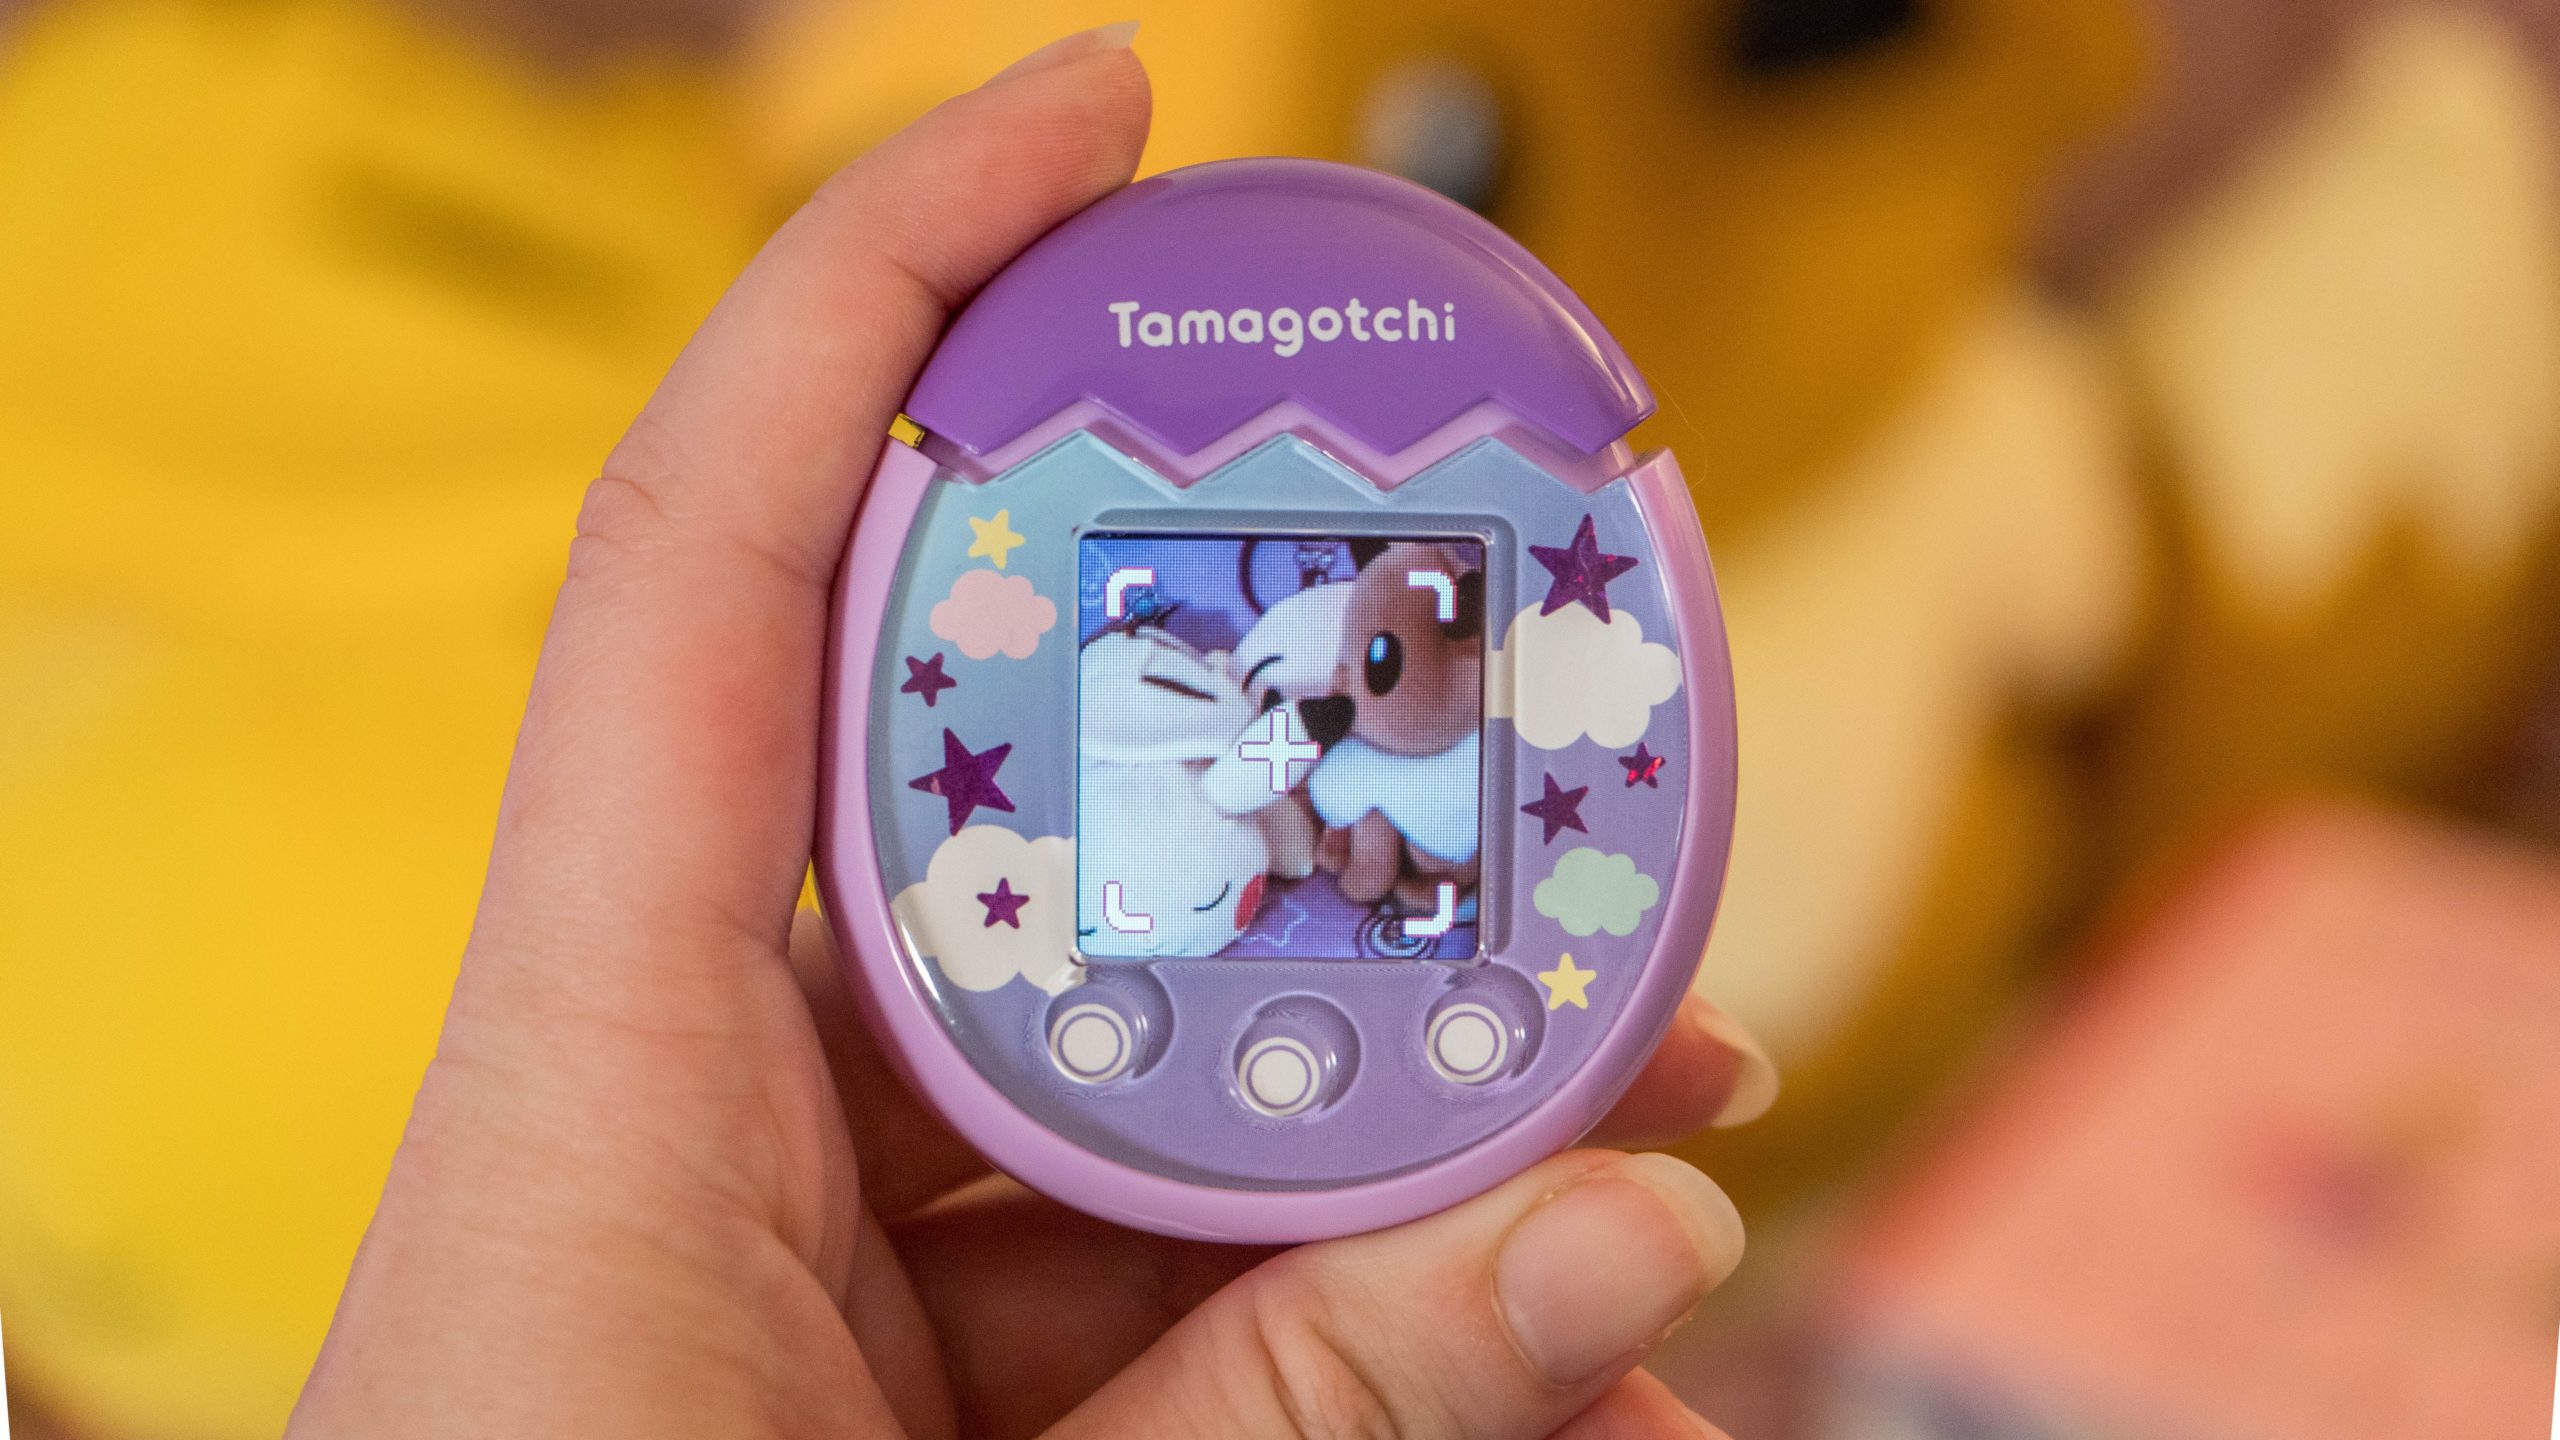 The novelty of taking a picture never wears off, especially if you're into posting on the Tamagotchi Pix's internal social network.  (Photo: Florence Ion / Gizmodo)